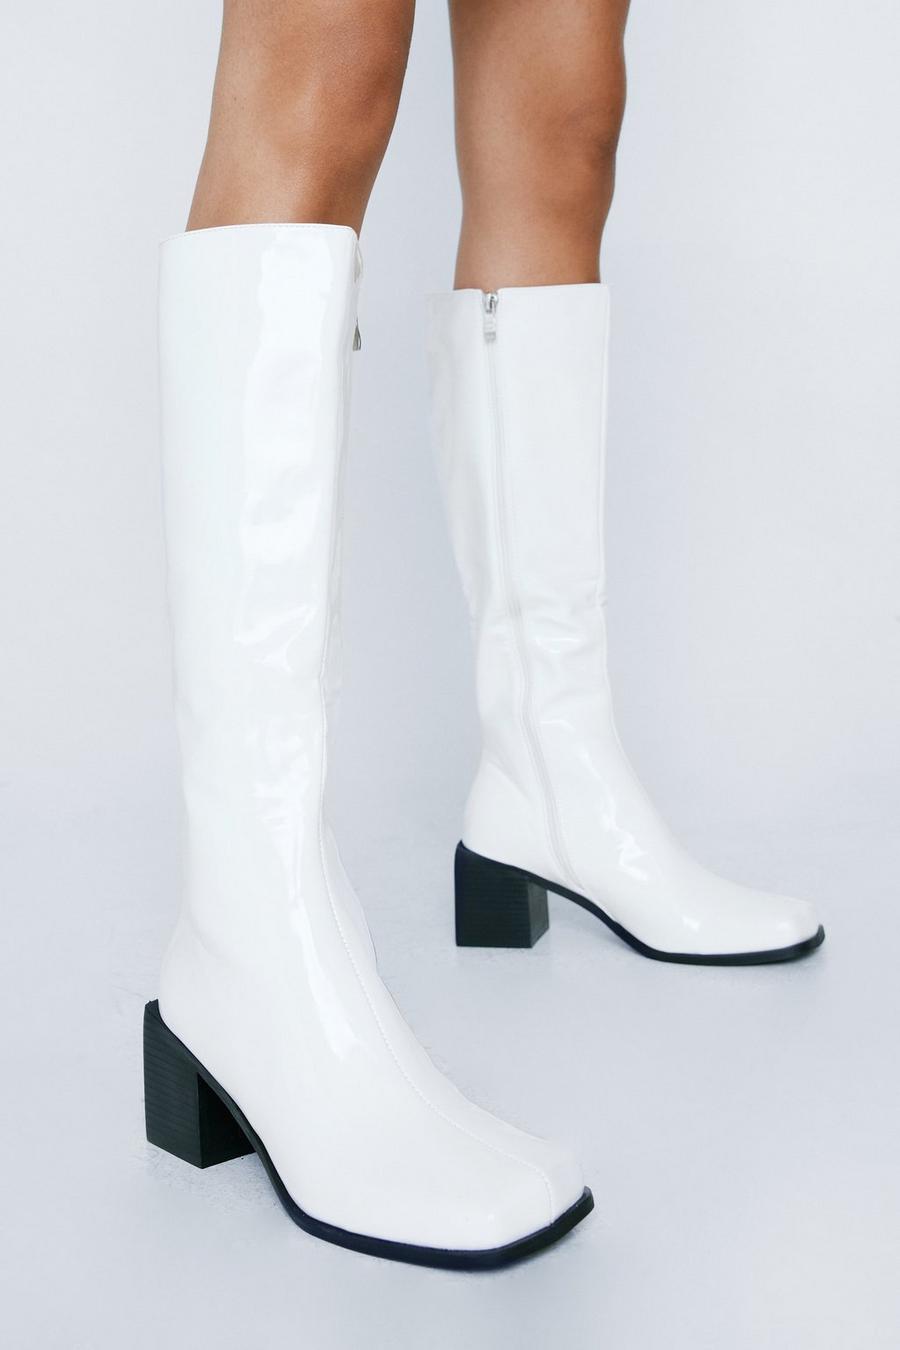 Patent Square Toe Knee High Boots 